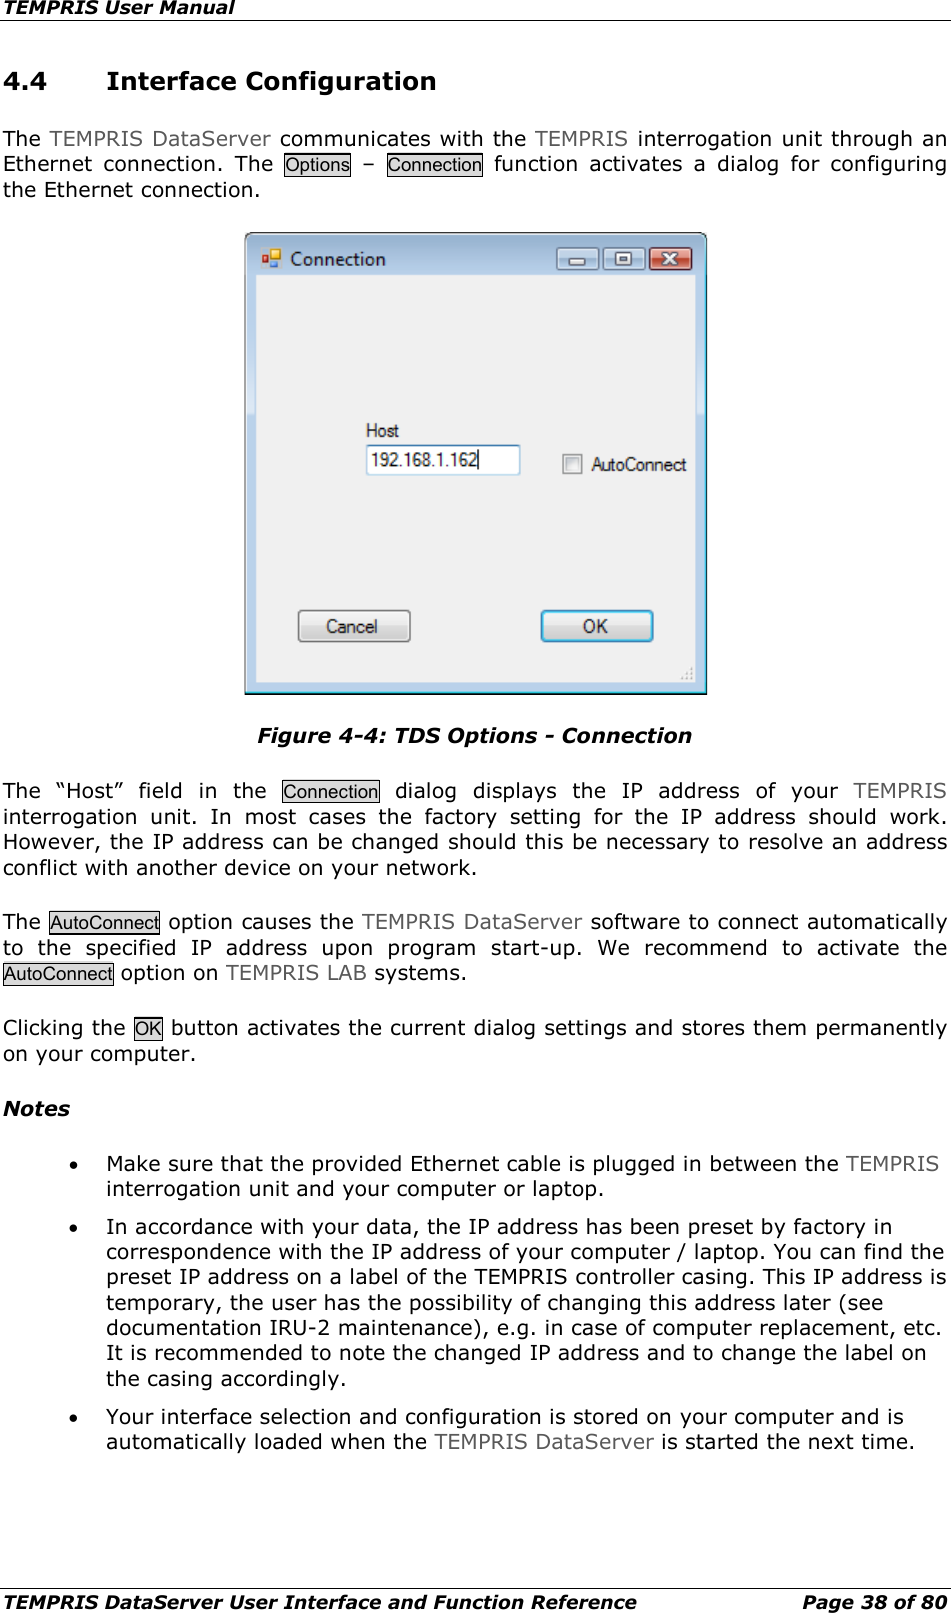 TEMPRIS User Manual TEMPRIS DataServer User Interface and Function Reference Page 38 of 80 4.4 Interface Configuration The TEMPRIS DataServer communicates with the TEMPRIS interrogation unit through an Ethernet connection.  The Options  –  Connection function  activates a dialog for configuring the Ethernet connection.  Figure 4-4: TDS Options - Connection The “Host” field in the Connection dialog  displays the IP address of your TEMPRIS interrogation unit. In most cases the factory setting for the IP address should work. However, the IP address can be changed should this be necessary to resolve an address conflict with another device on your network. The AutoConnect option causes the TEMPRIS DataServer software to connect automatically to the specified IP address upon program start-up. We recommend to activate the AutoConnect option on TEMPRIS LAB systems. Clicking the OK button activates the current dialog settings and stores them permanently on your computer. Notes • Make sure that the provided Ethernet cable is plugged in between the TEMPRIS interrogation unit and your computer or laptop. • In accordance with your data, the IP address has been preset by factory in correspondence with the IP address of your computer / laptop. You can find the preset IP address on a label of the TEMPRIS controller casing. This IP address is temporary, the user has the possibility of changing this address later (see documentation IRU-2 maintenance), e.g. in case of computer replacement, etc. It is recommended to note the changed IP address and to change the label on the casing accordingly. • Your interface selection and configuration is stored on your computer and is automatically loaded when the TEMPRIS DataServer is started the next time.    